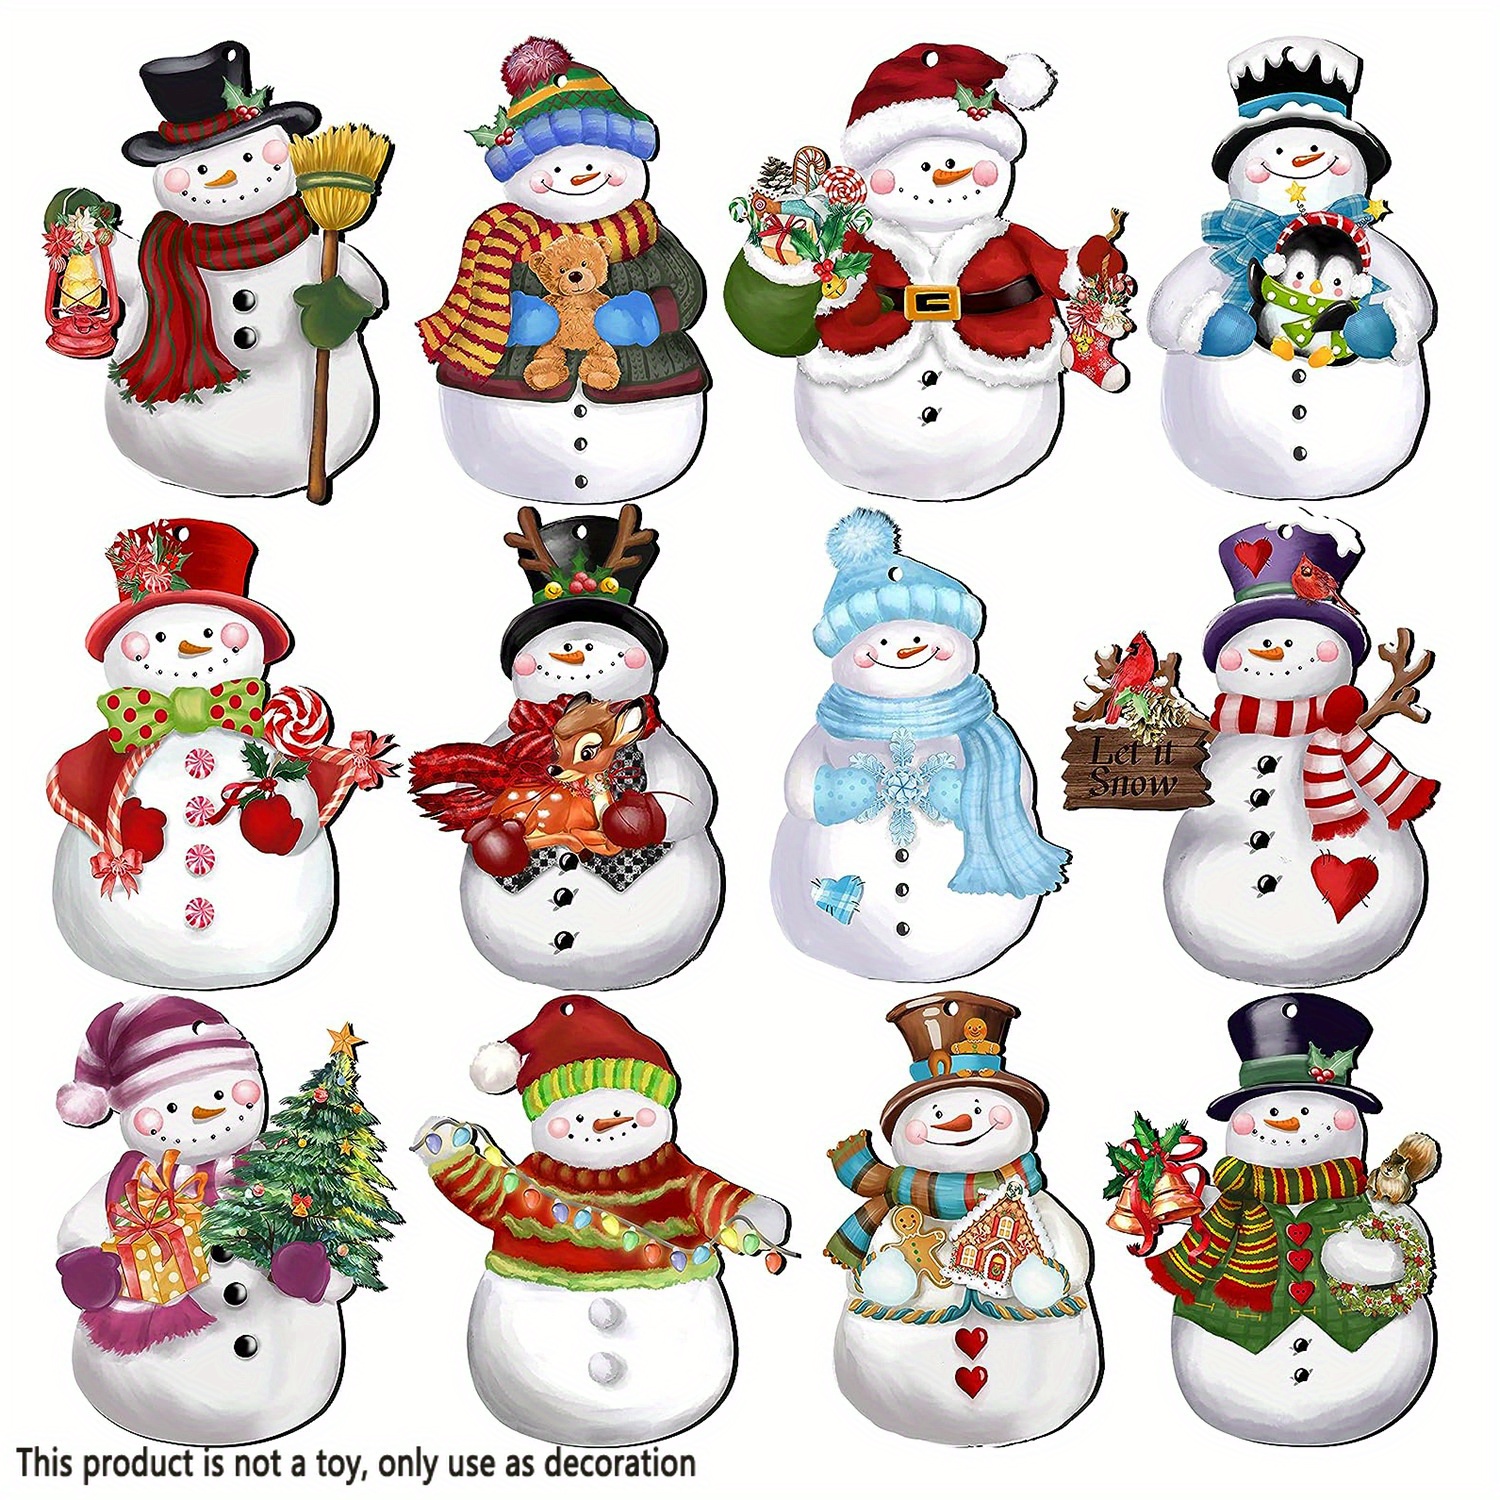 

24-piece Snowman Wooden Ornaments Set - Perfect For Christmas Tree, Garden & Yard Decorations, No Power Needed